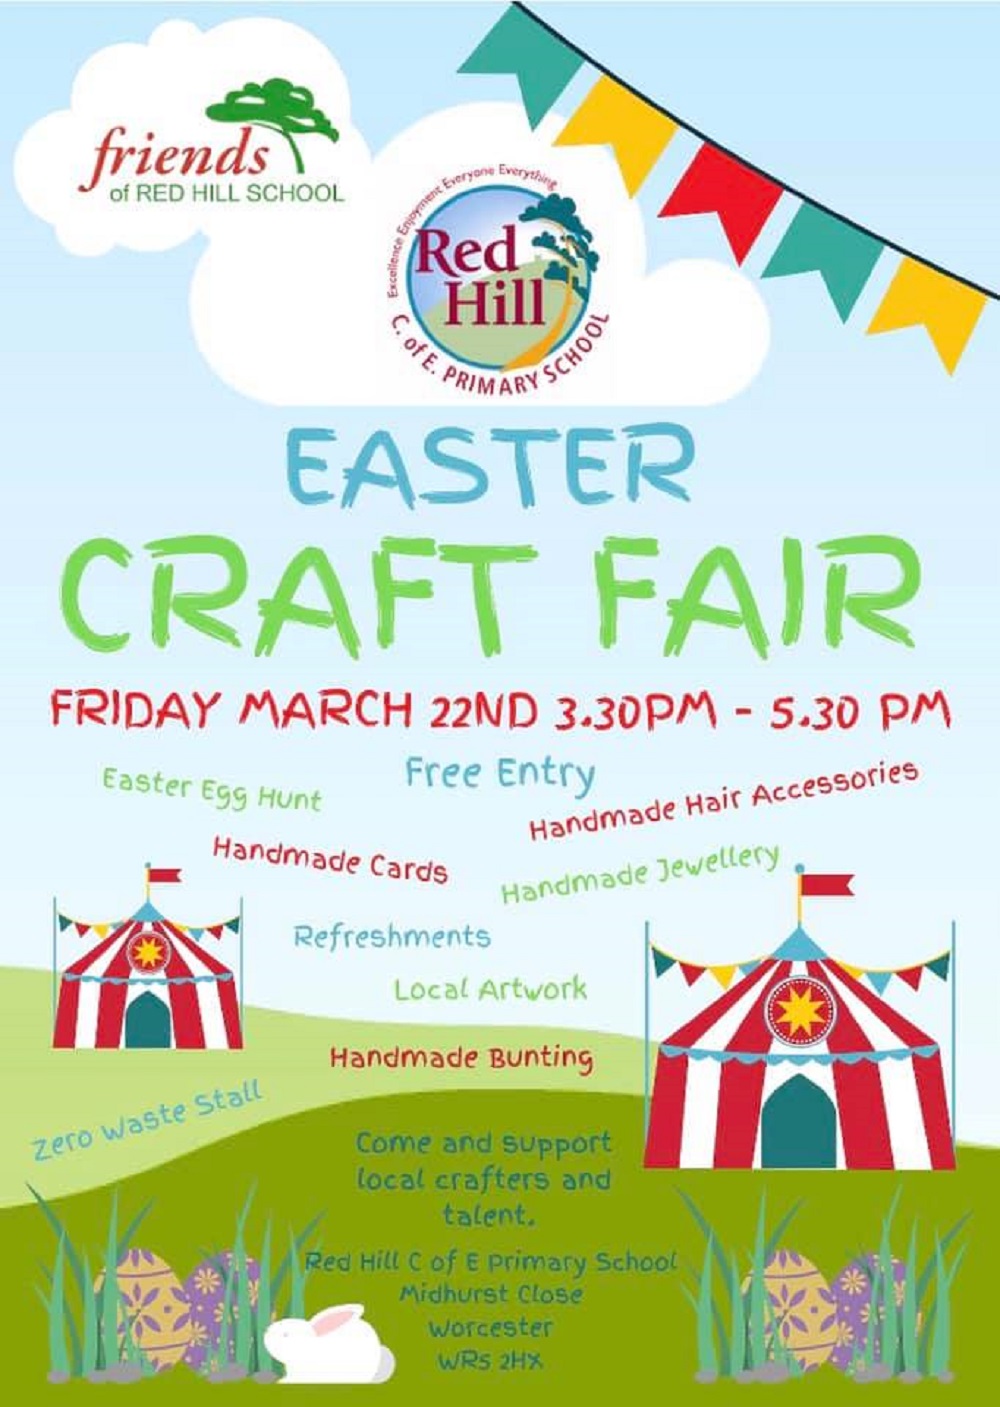 Easter craft fair being held at Red Hill C of E Primary School in Worcester